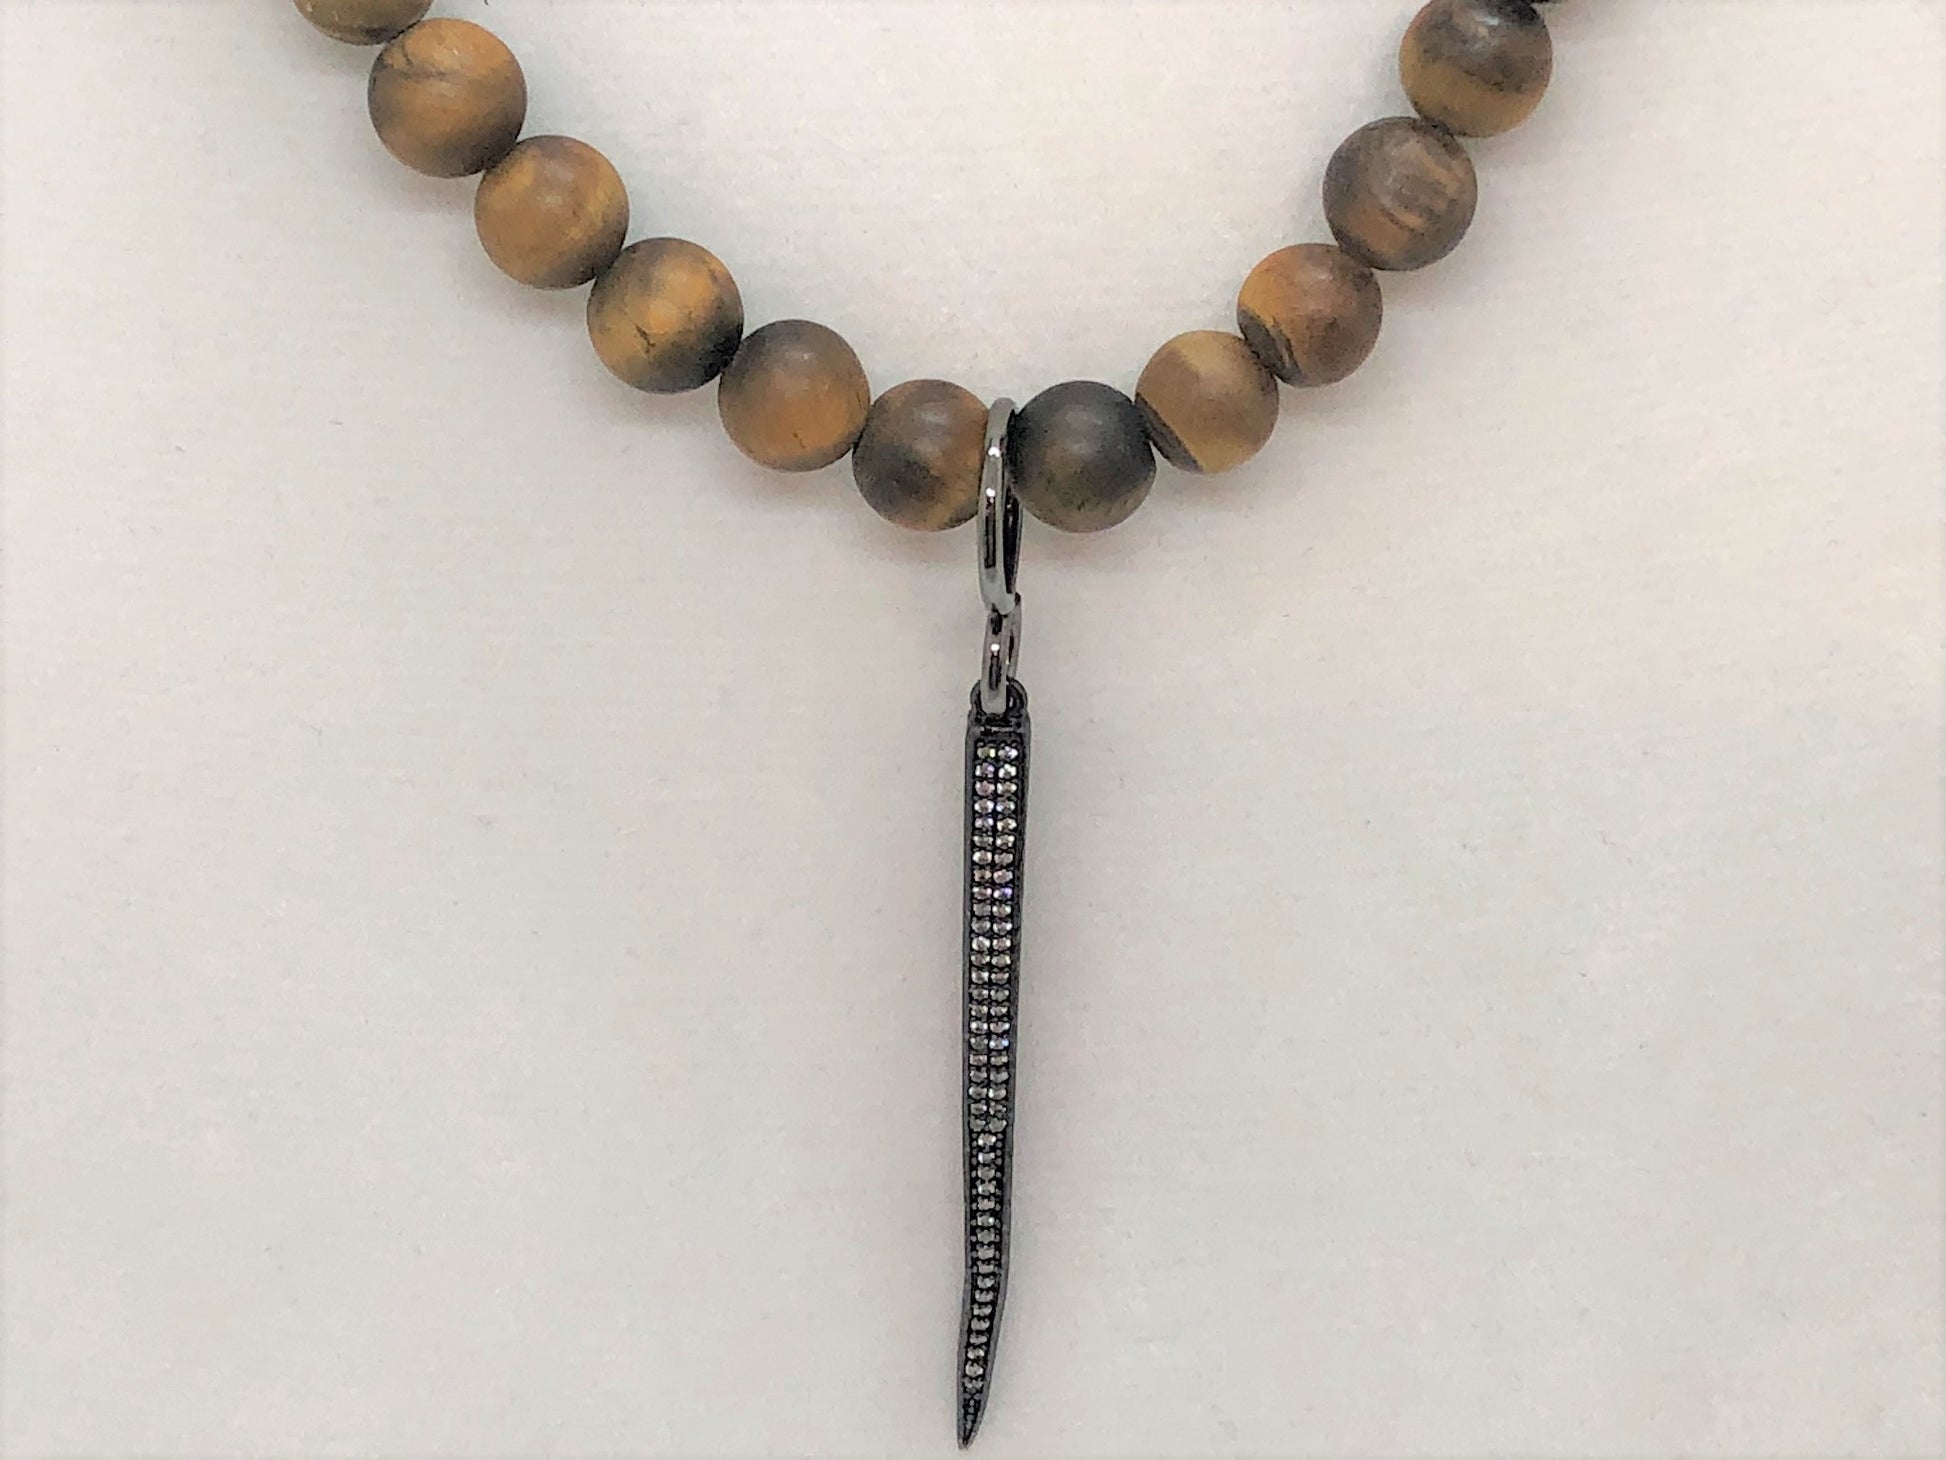 Tiger Eye Necklace with Interchangeable Pendants - Emmis Jewelry, Necklace, [product_color]